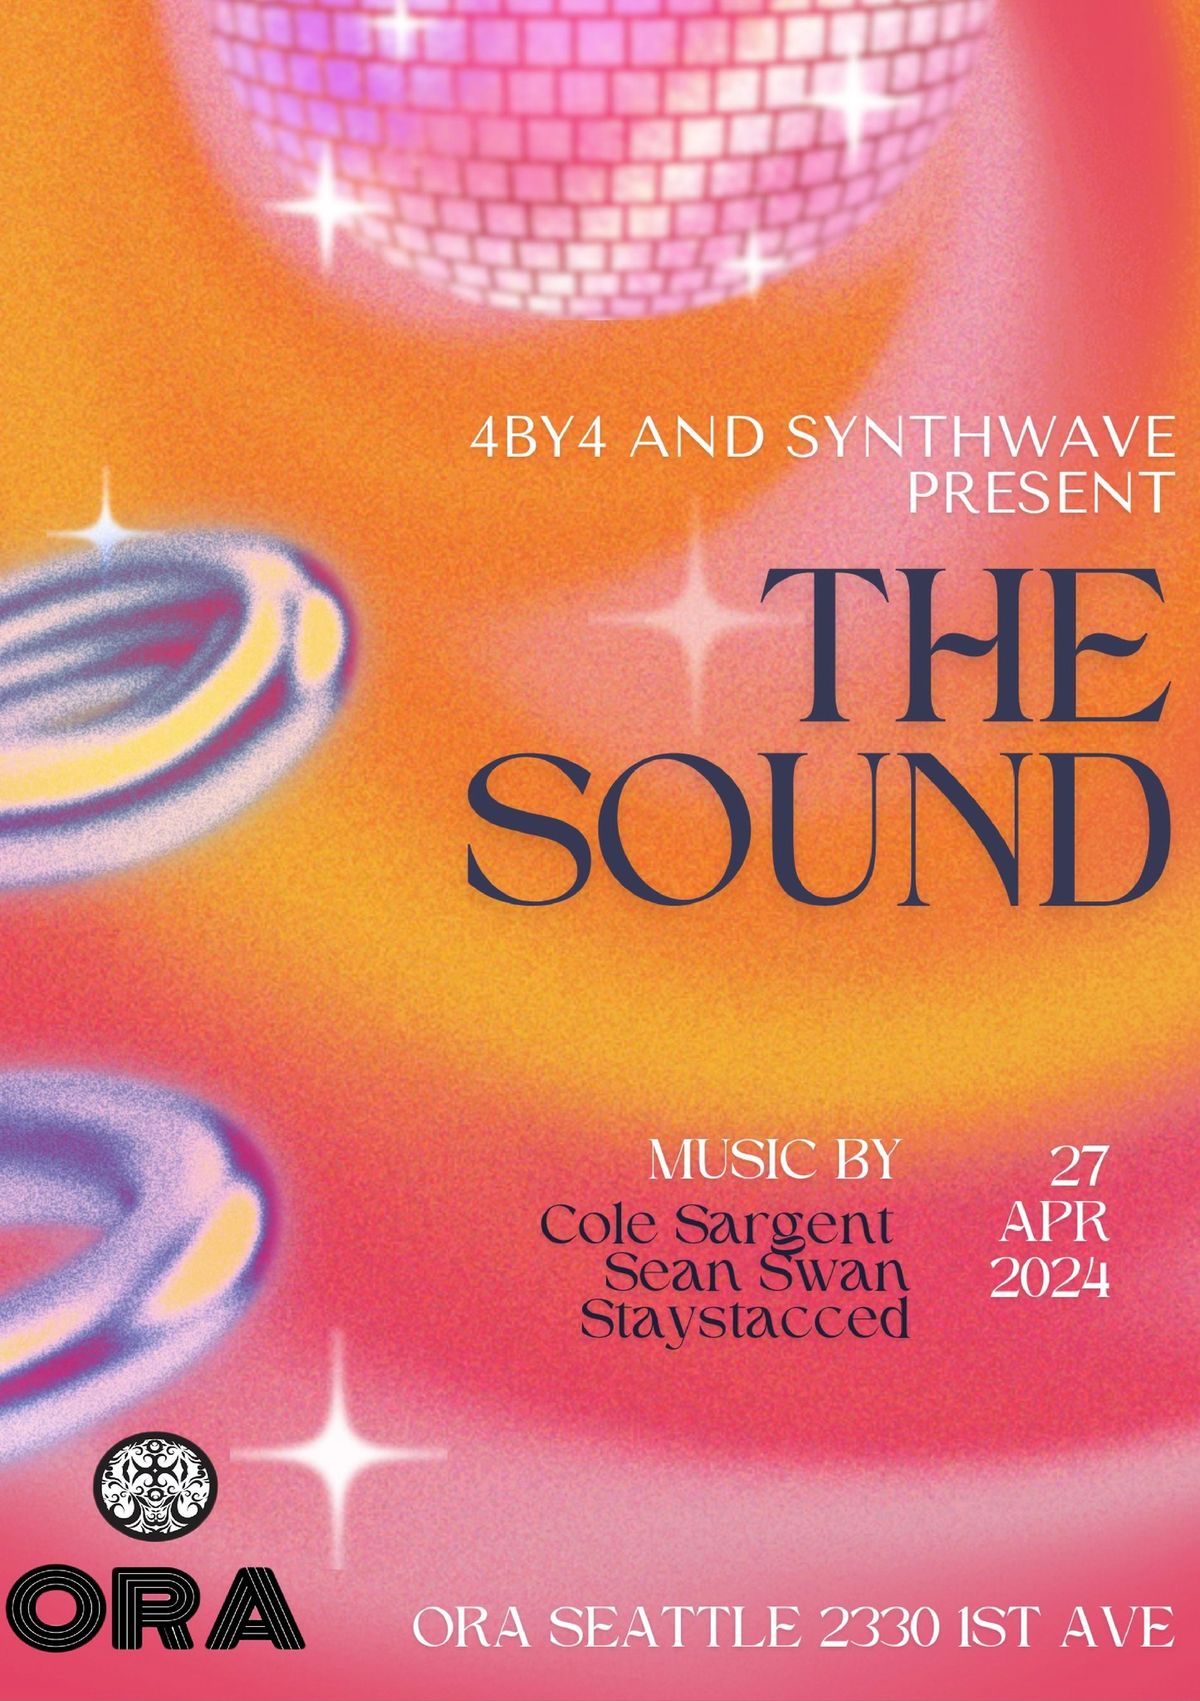 THE SOUND by 4BY4 and Synthwaveat Ora 